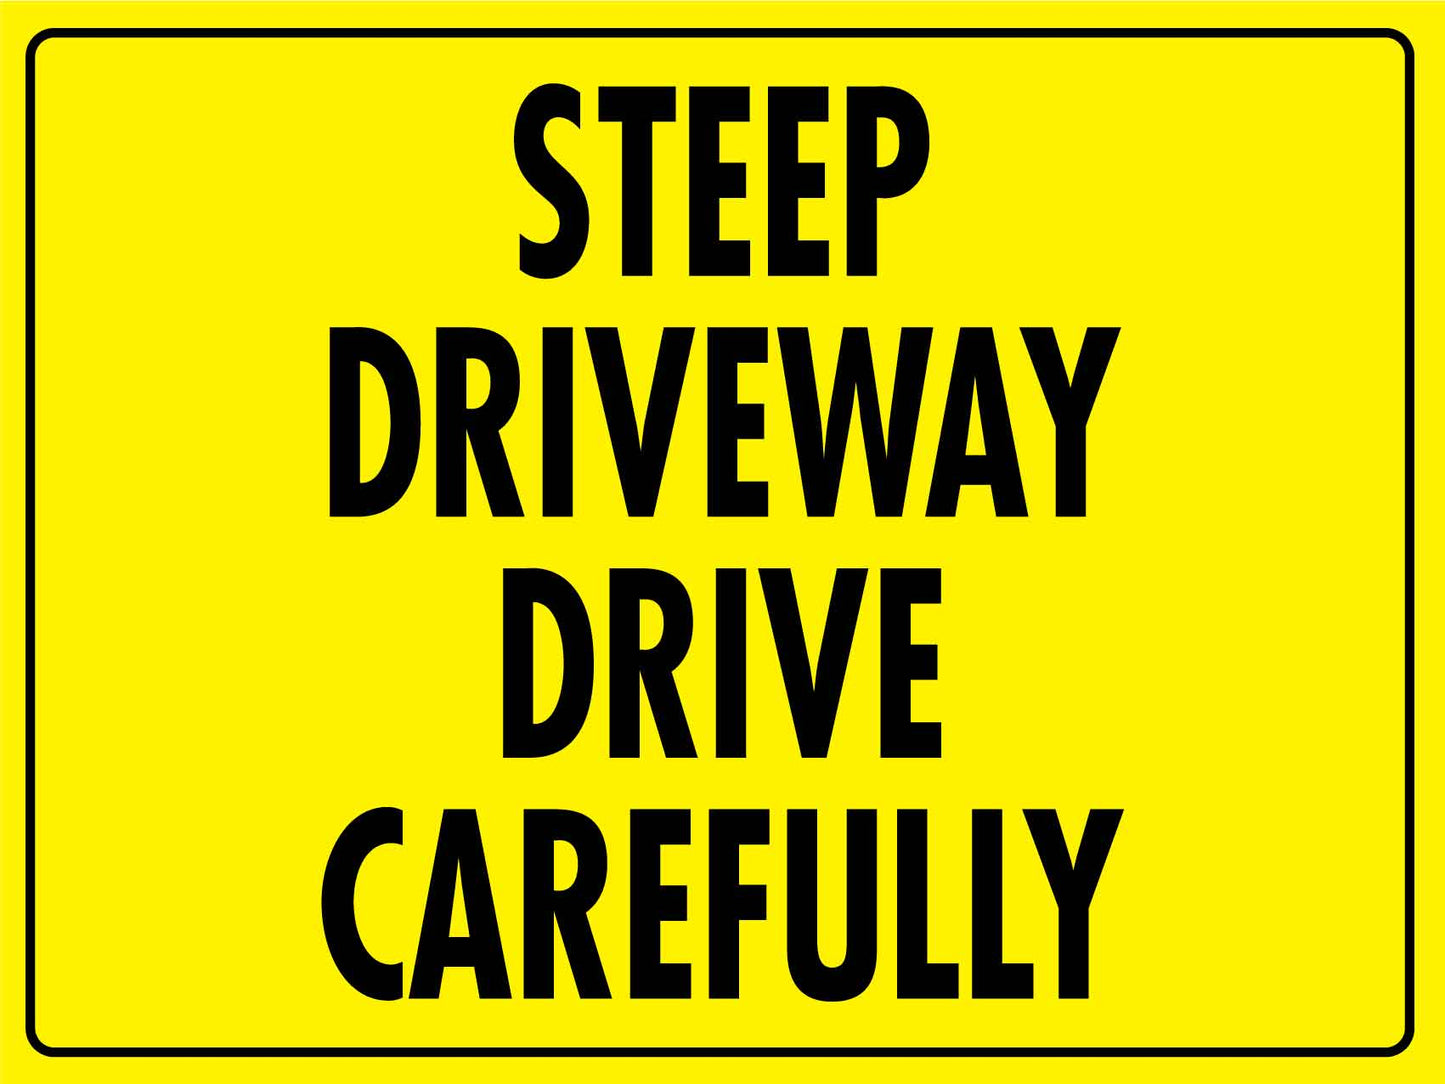 Steep Driveway Drive Carefully Sign